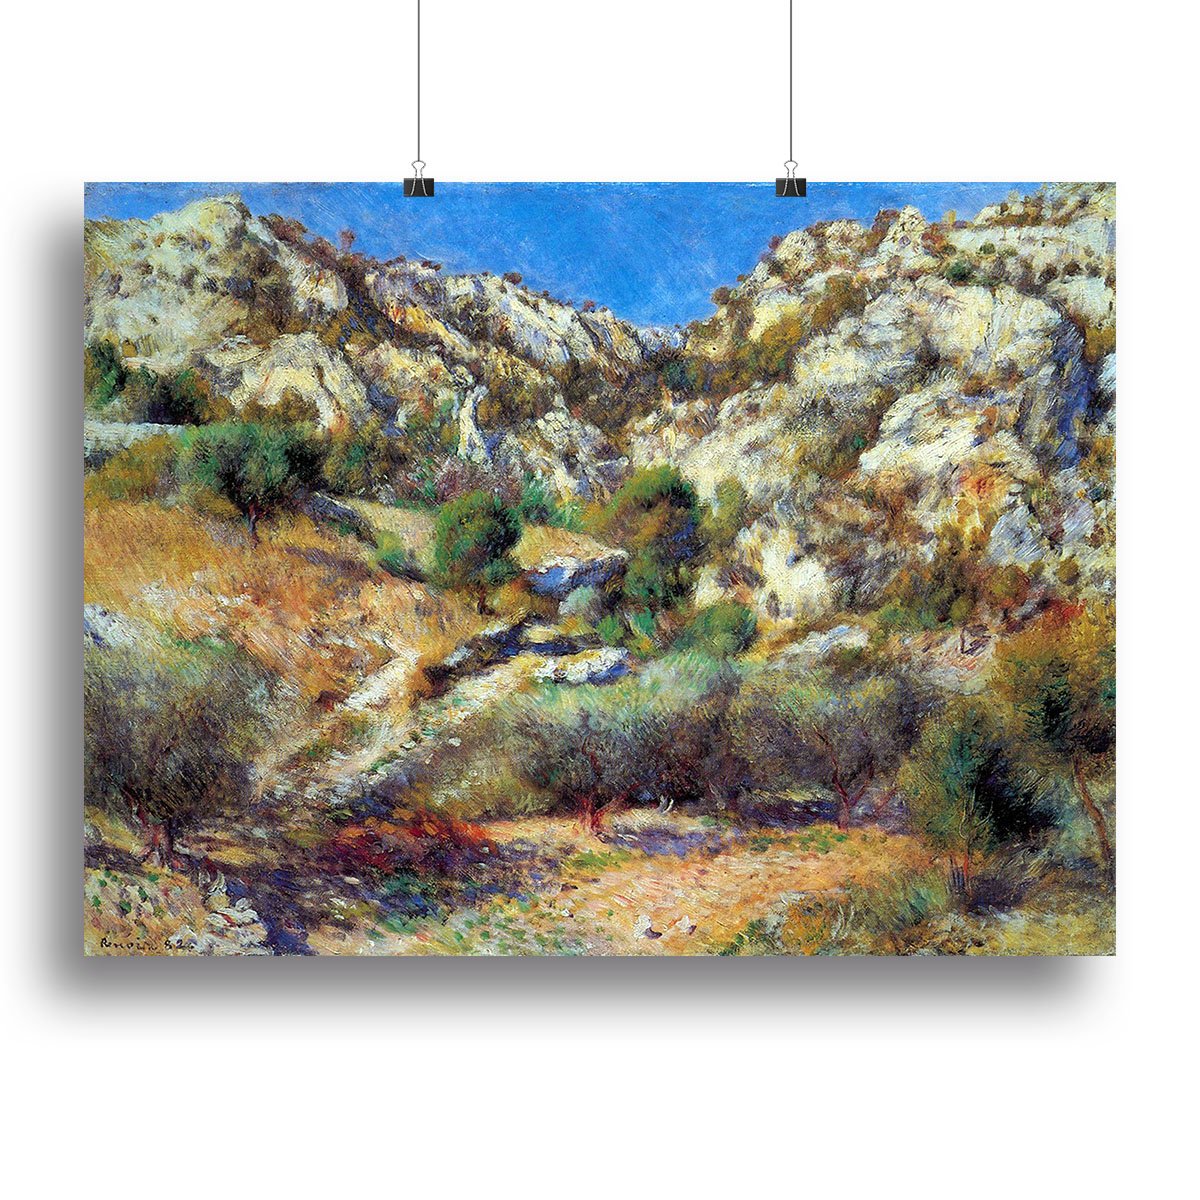 Rocks at LEstage by Renoir Canvas Print or Poster